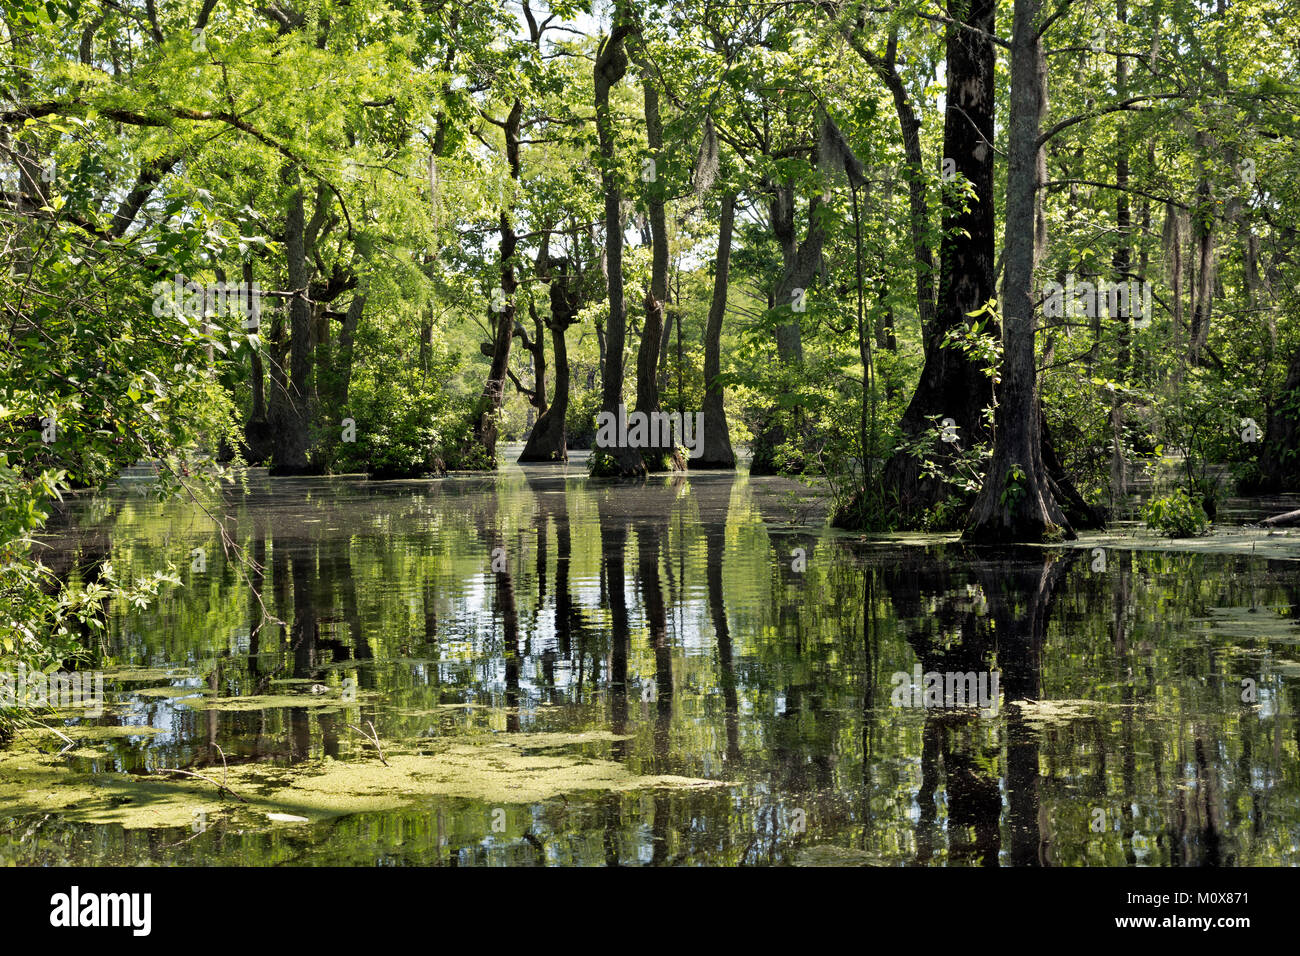 NC01441-00...NORTH CAROLINA - A cypress swamp and planty of duckweed reflecting in the still waters of Merchant Millpond in Merchant Millpond State Pa Stock Photo